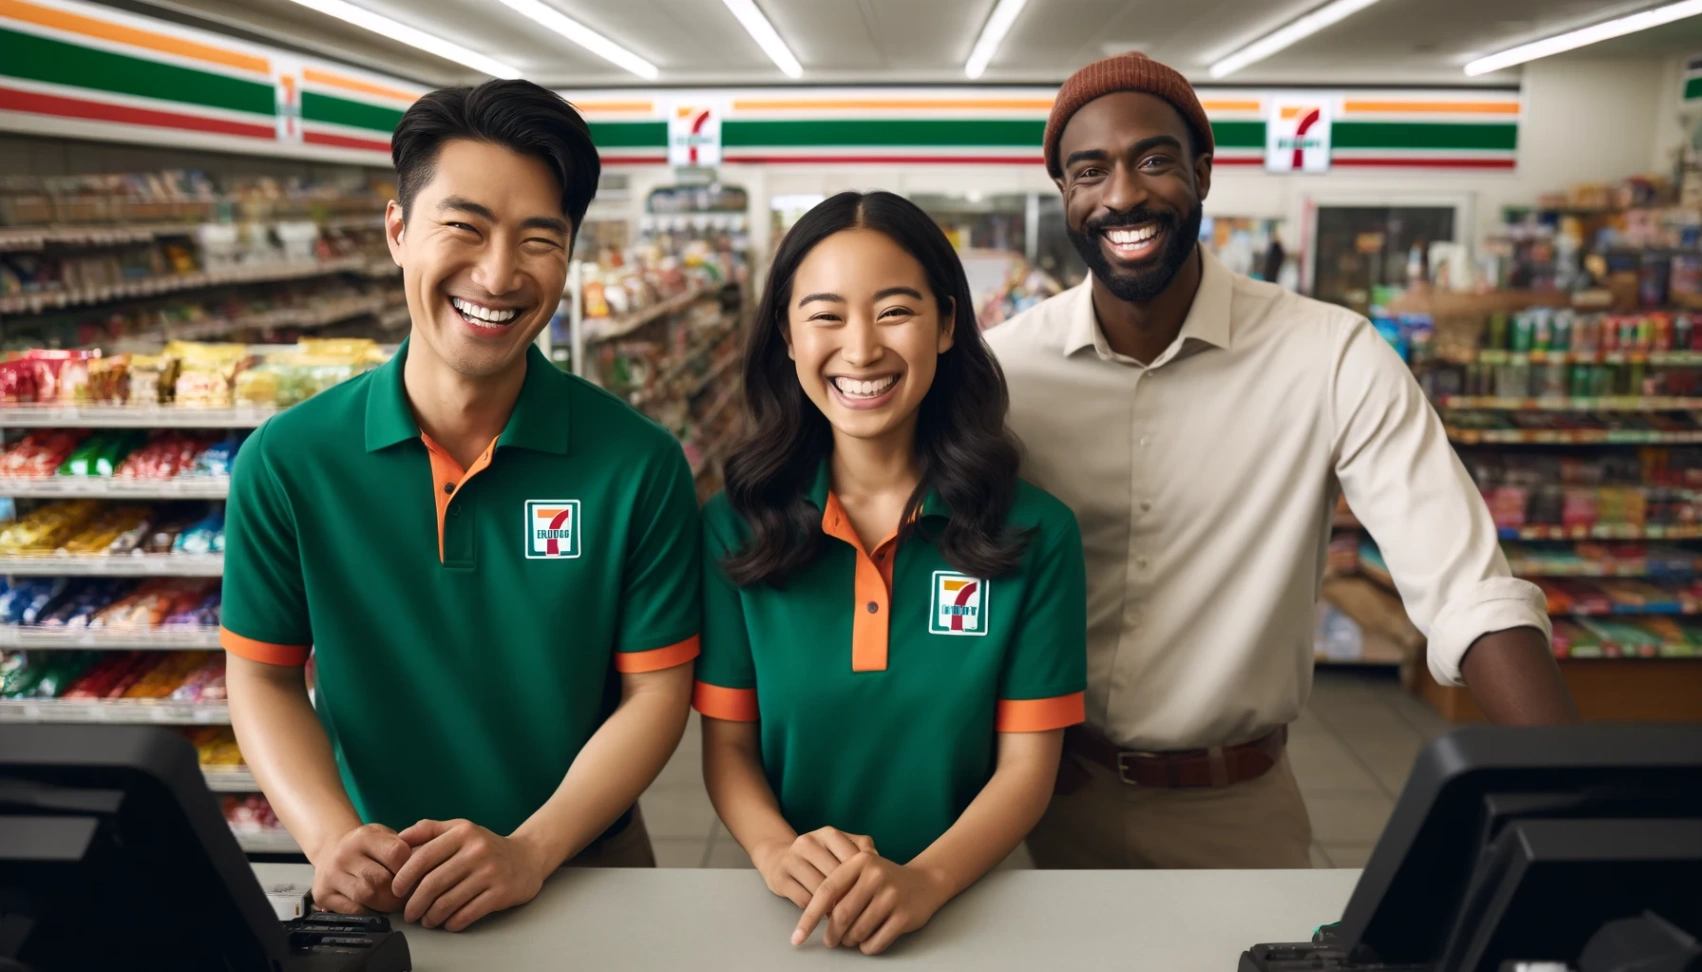 Apply to 7-Eleven: Step-by-Step Online Guide